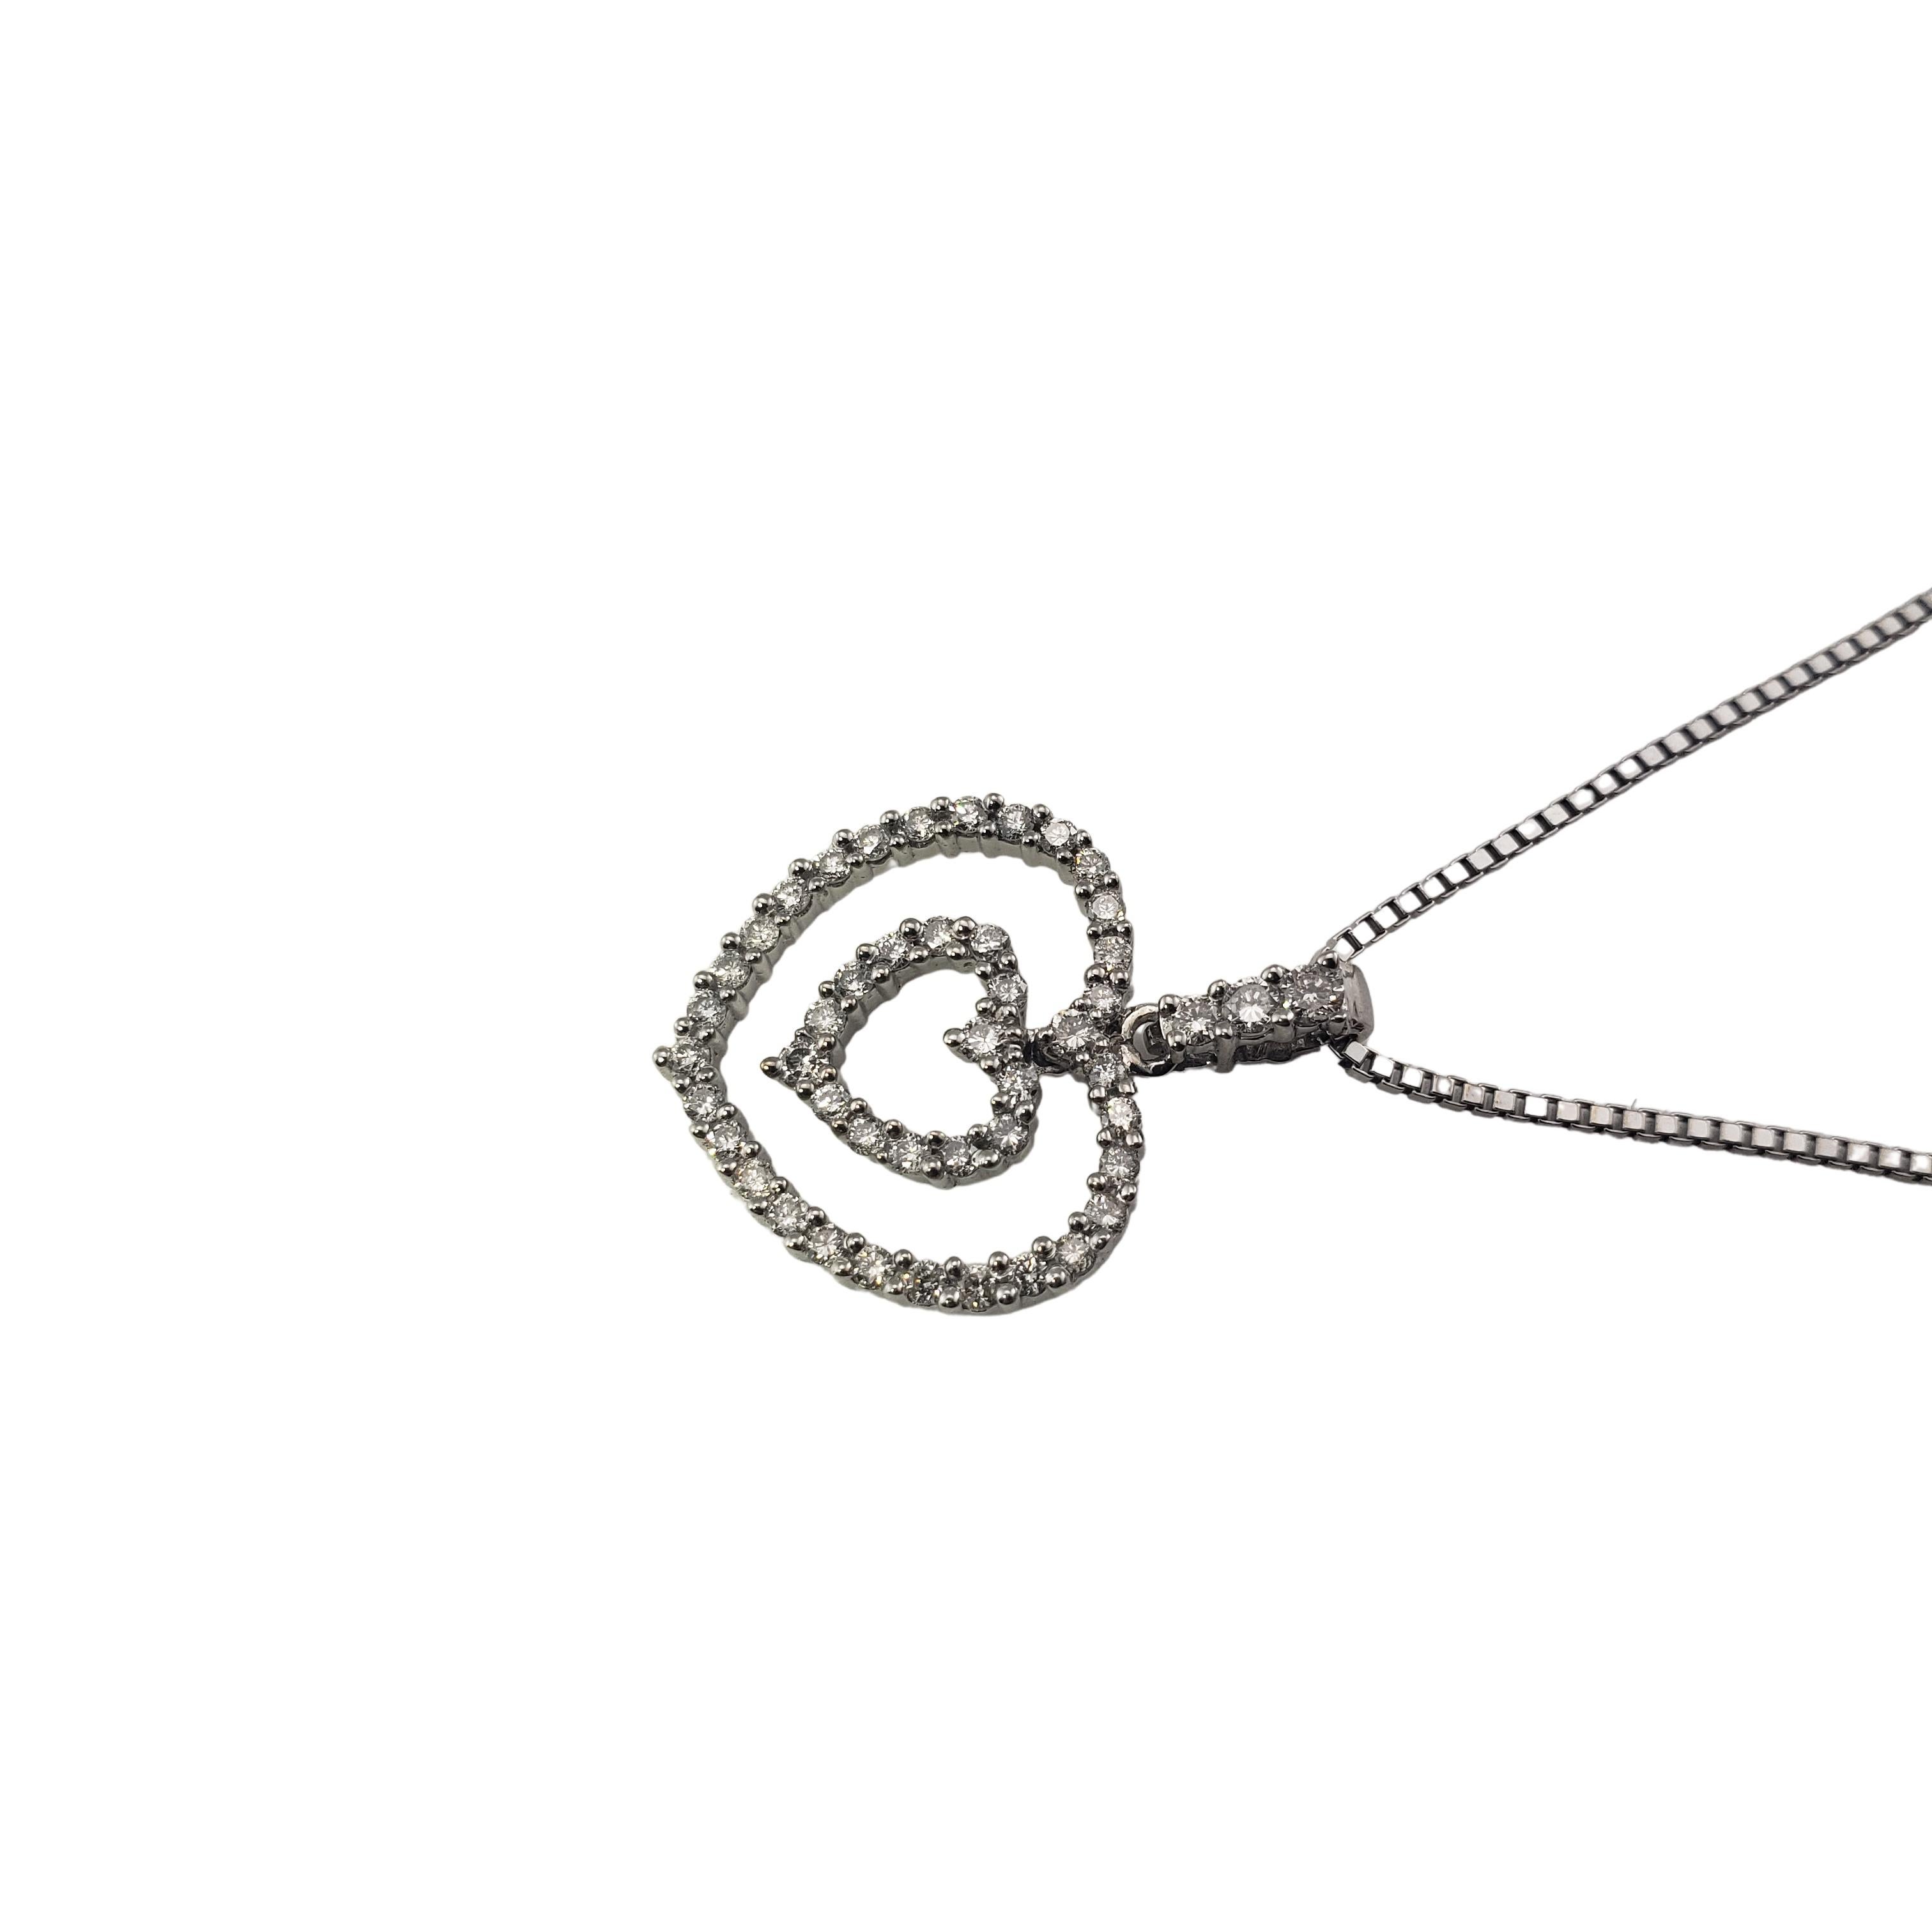 Vintage 14 Karat White Gold Diamond Double Heart Pendant Necklace-

This lovely necklace features a sparkling double heart pendant with 47 round brilliant cut diamonds set in classic 14K white gold.

Approximate total diamond weight: .50ct.

Diamond